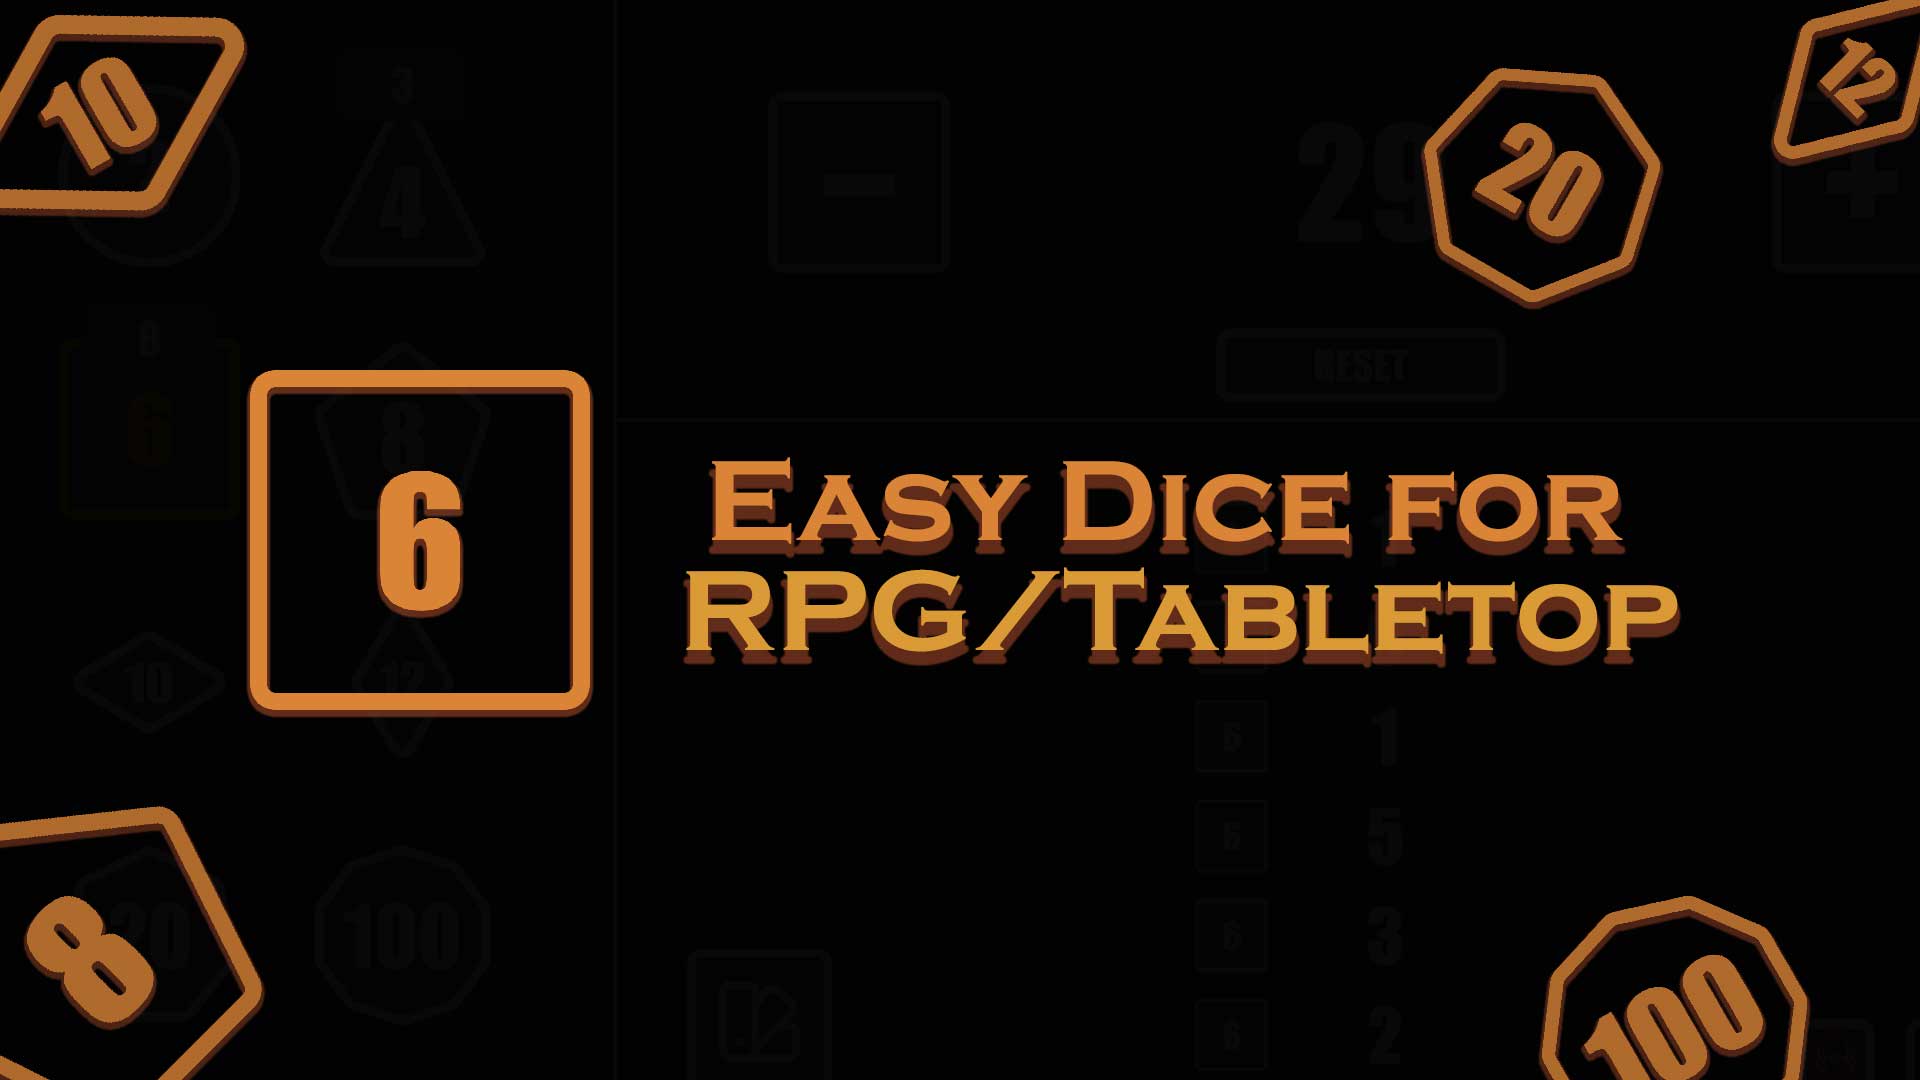 Easy Dice for RPG/Tabletop 1